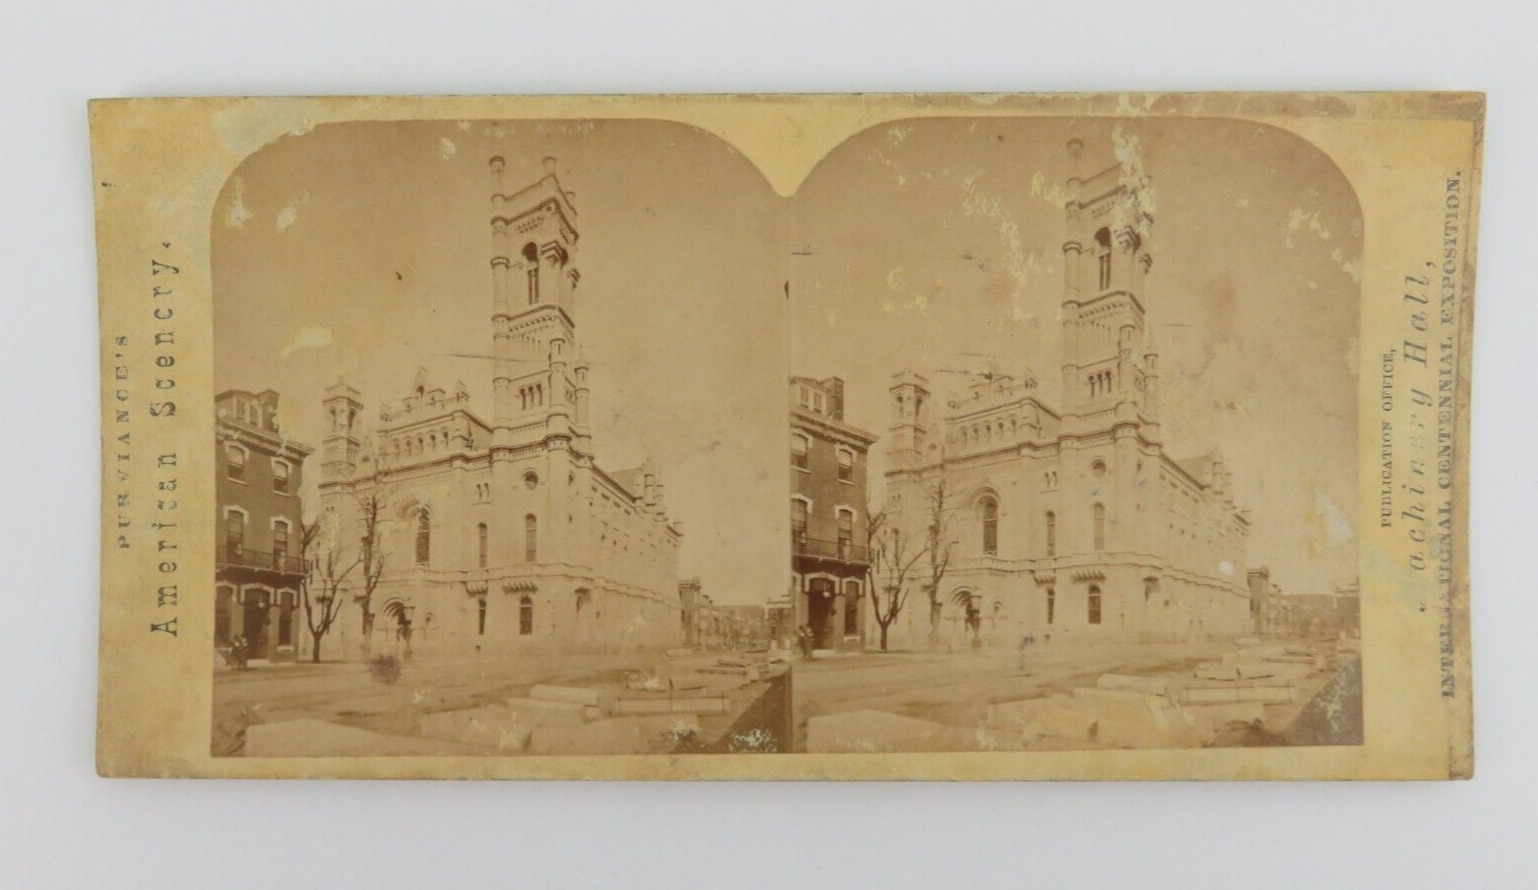 Purviance Intl Centennial Exposition Machinery Hall View of Building Stereoview